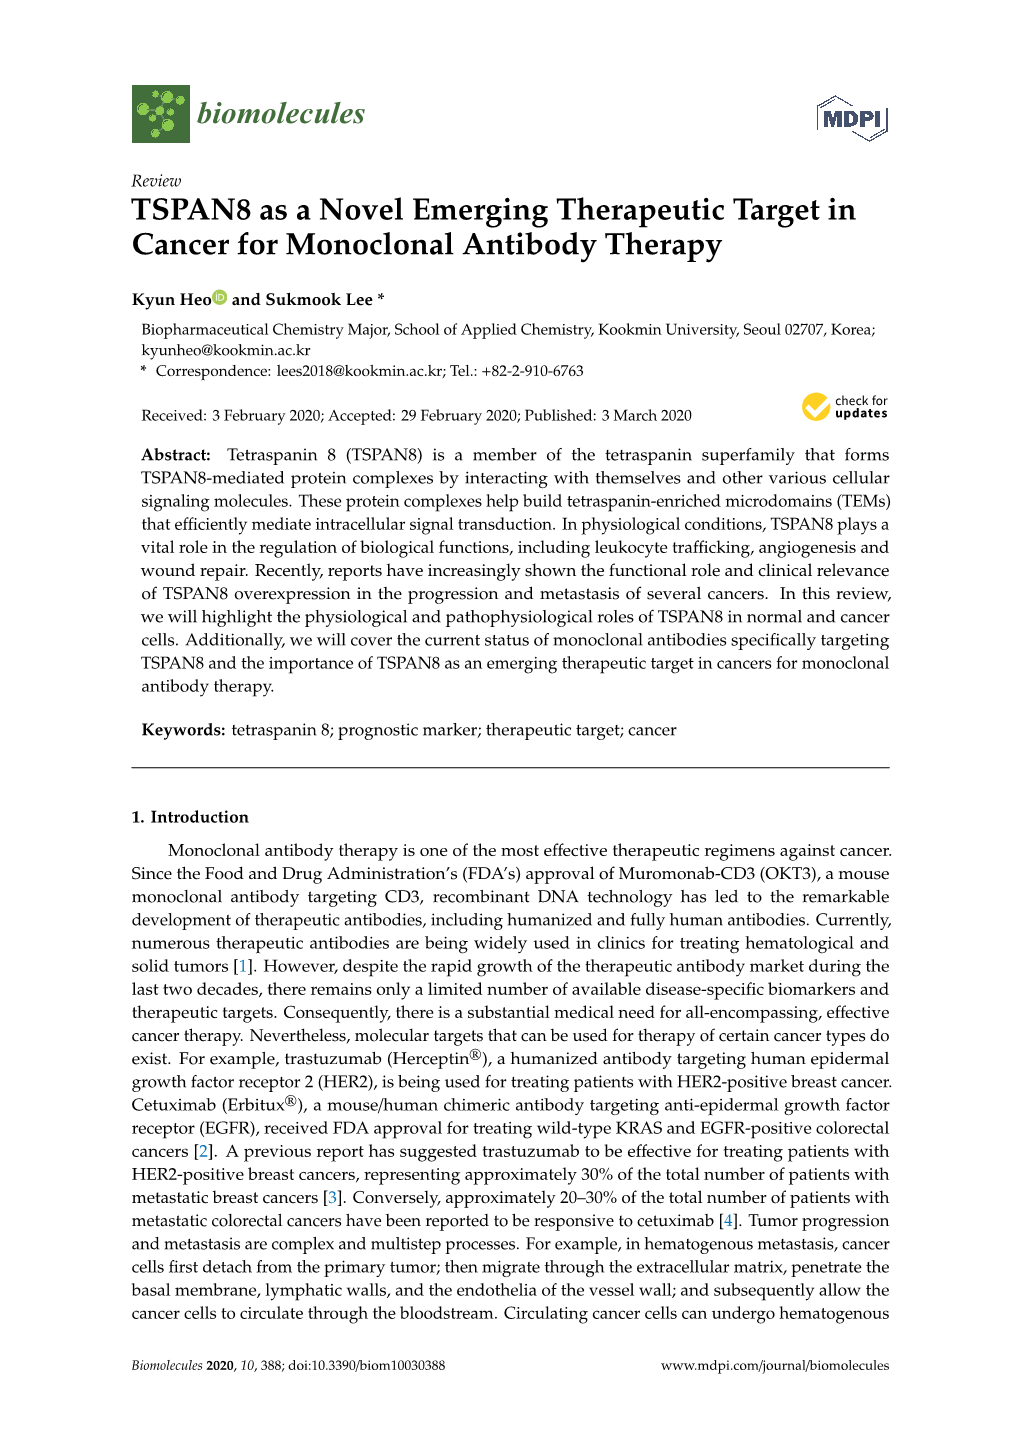 TSPAN8 As a Novel Emerging Therapeutic Target in Cancer for Monoclonal Antibody Therapy